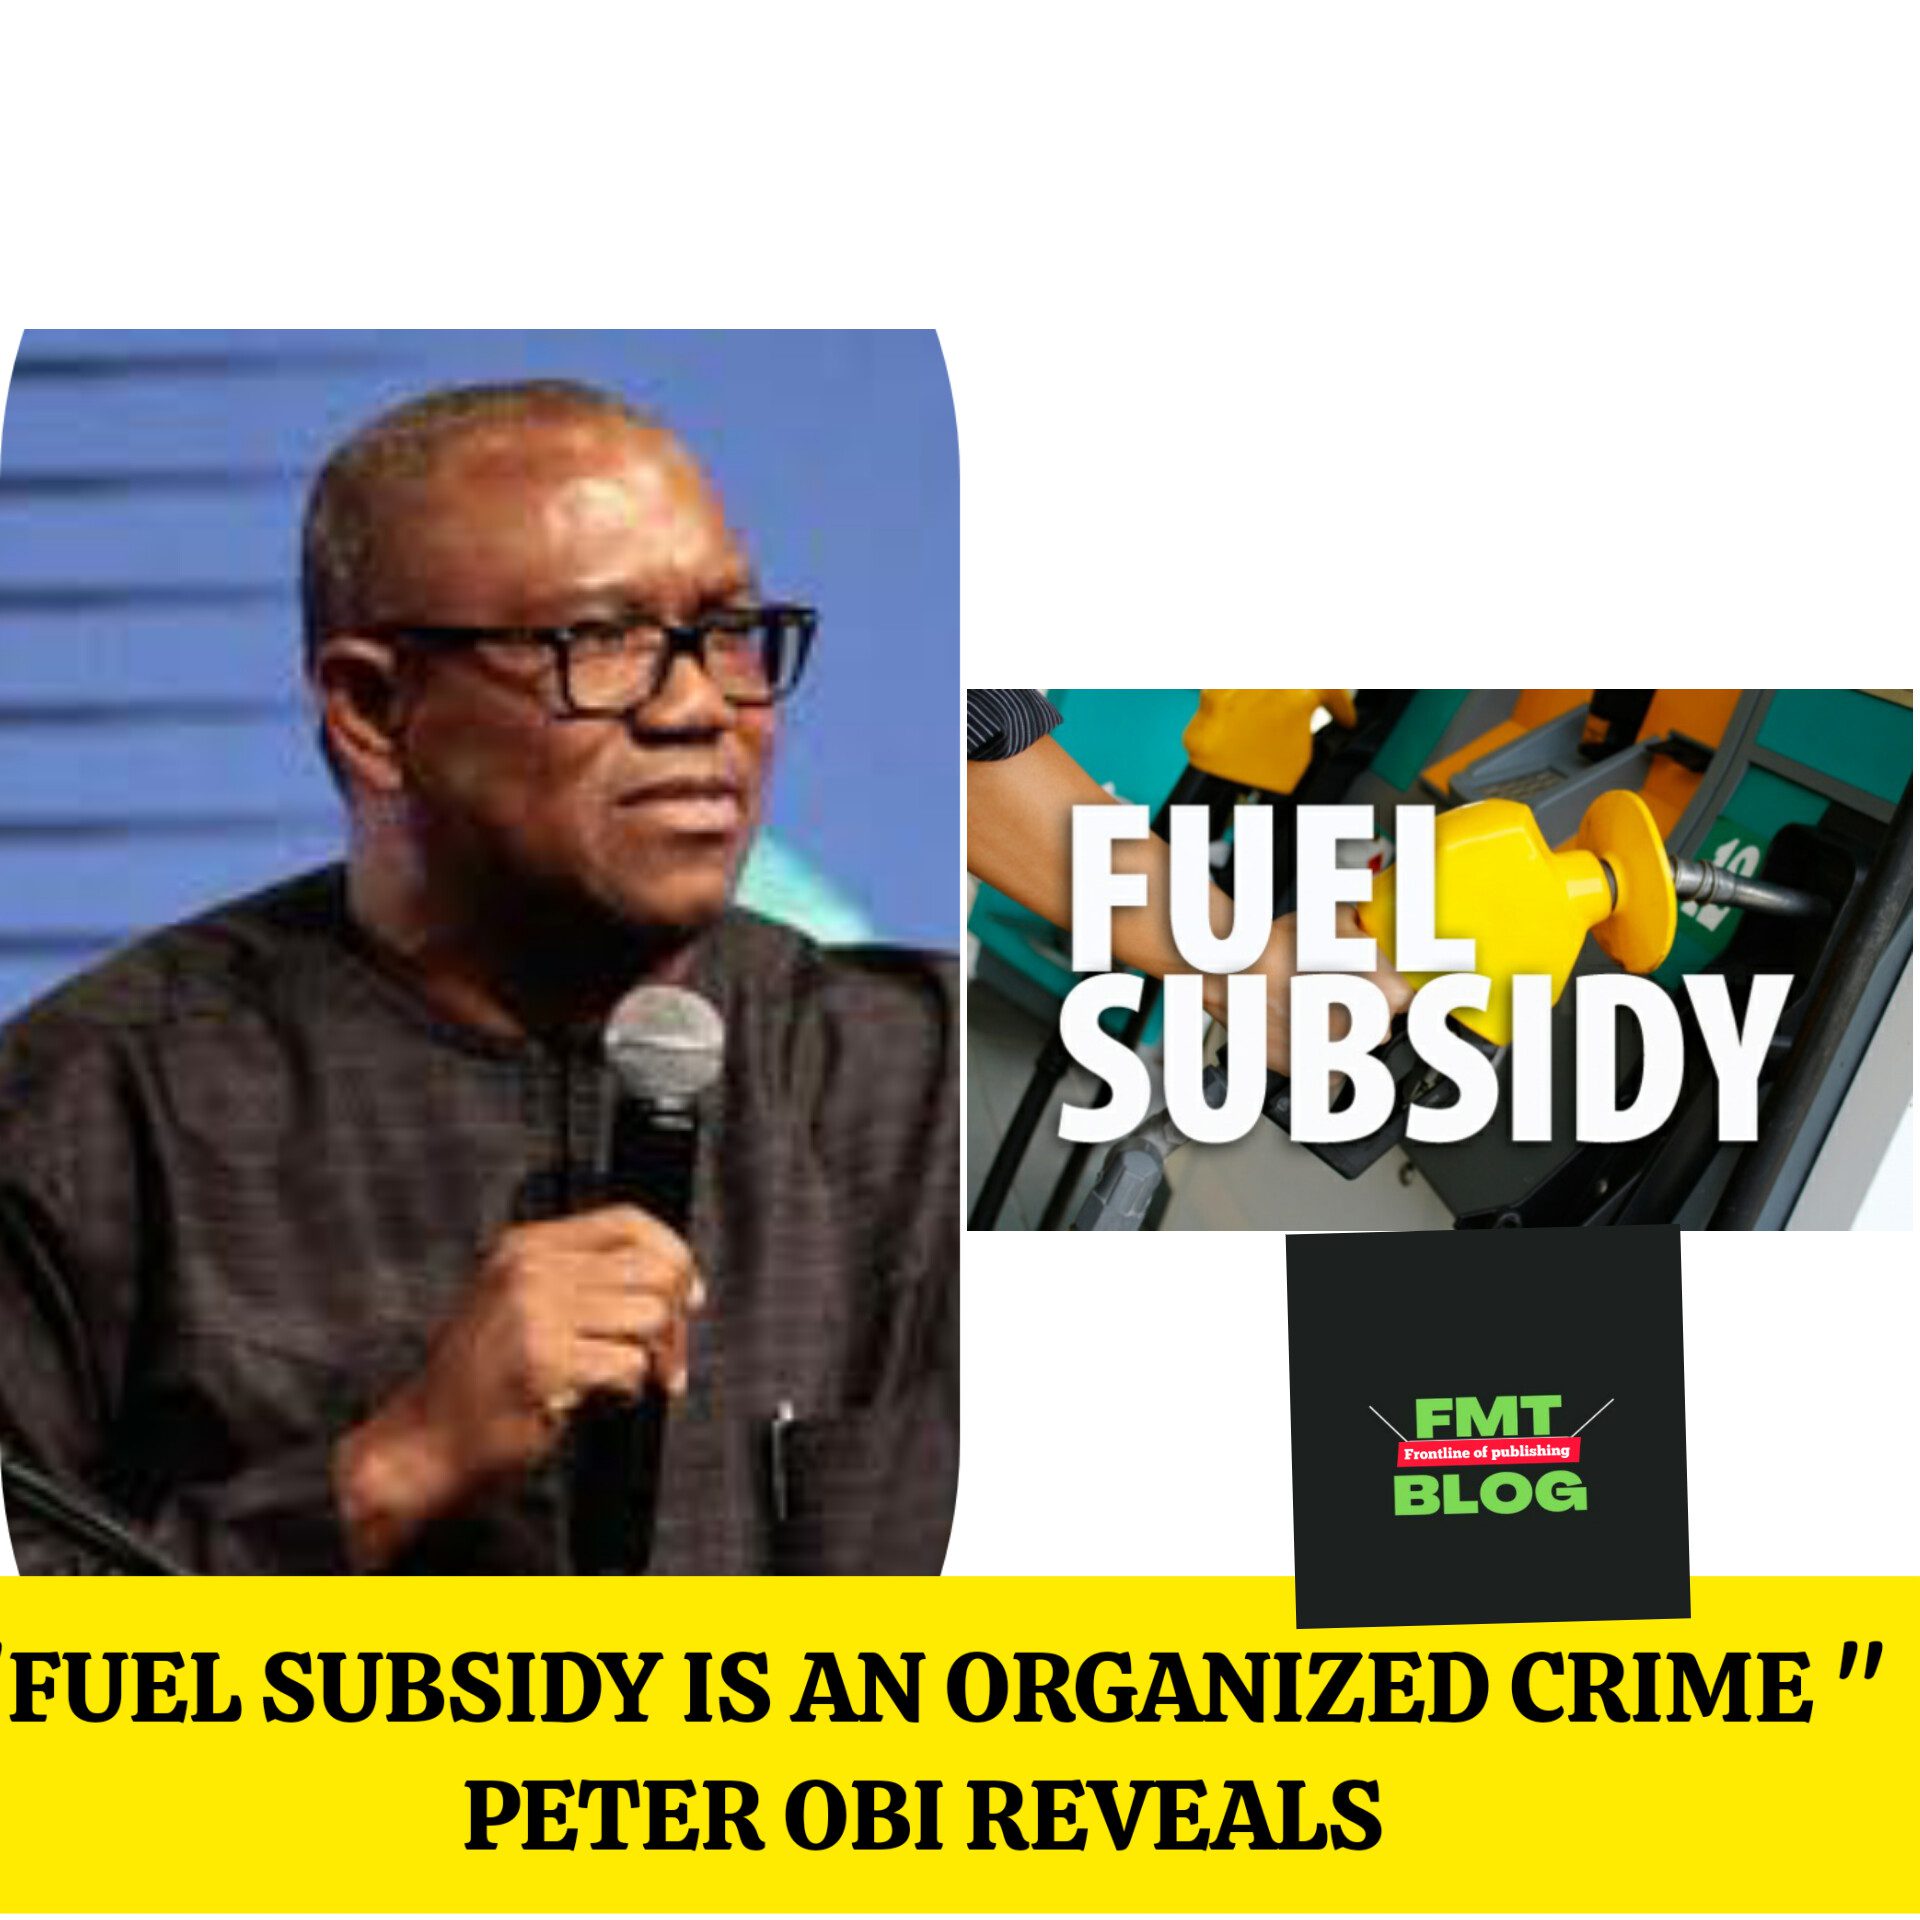 ‘Fuel subsidy is an organized crime’ – Peter Obi reveals  [Videos]